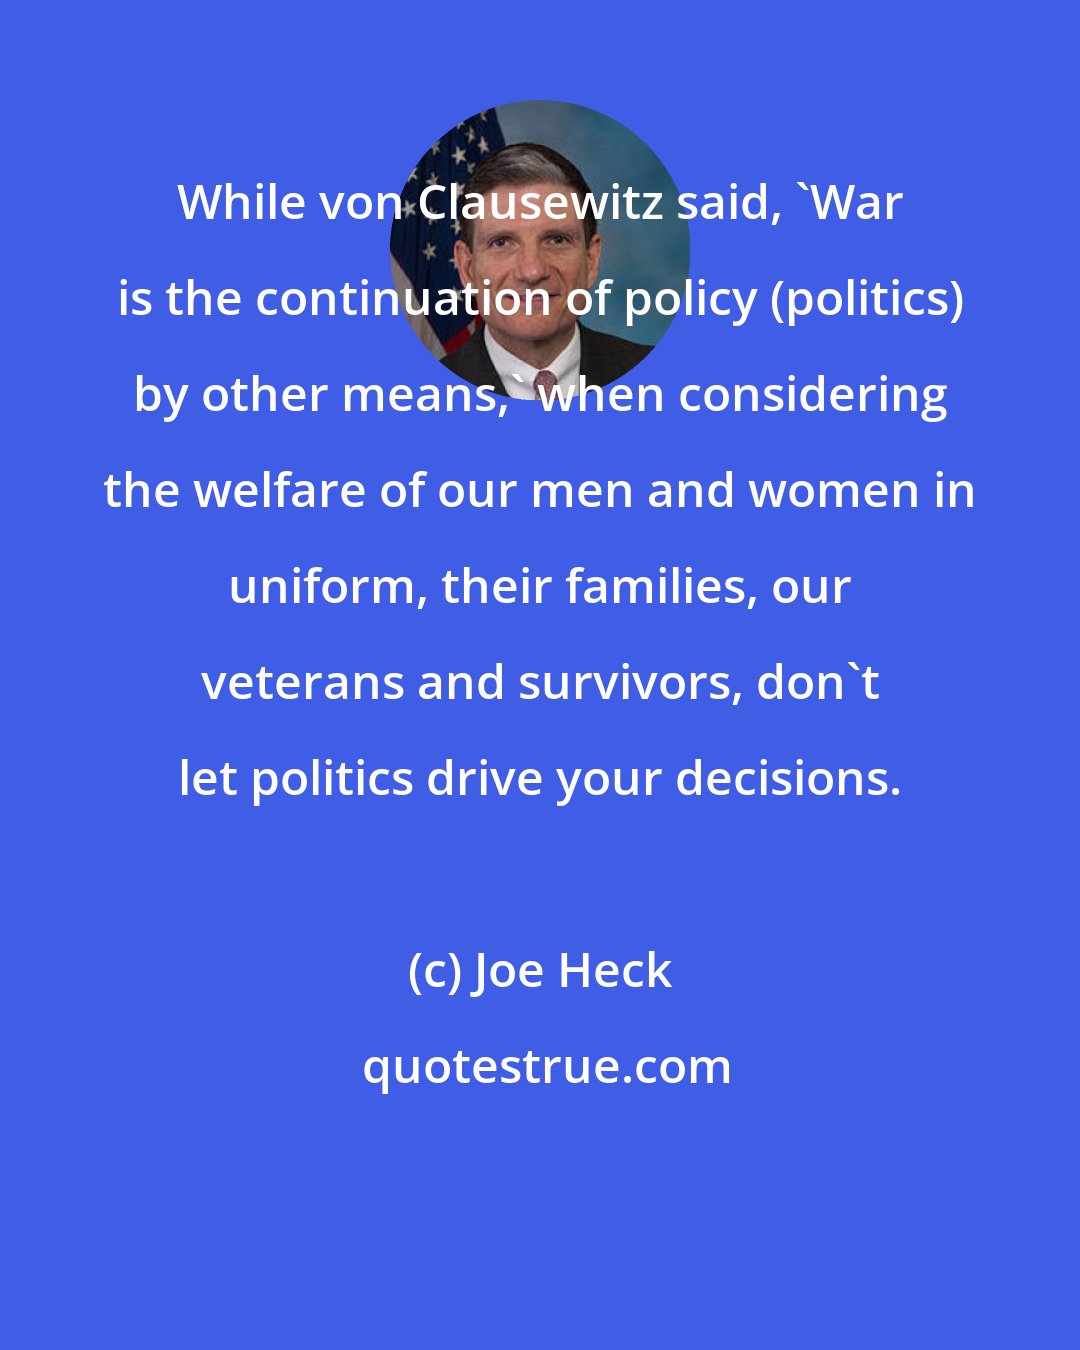 Joe Heck: While von Clausewitz said, 'War is the continuation of policy (politics) by other means,' when considering the welfare of our men and women in uniform, their families, our veterans and survivors, don't let politics drive your decisions.